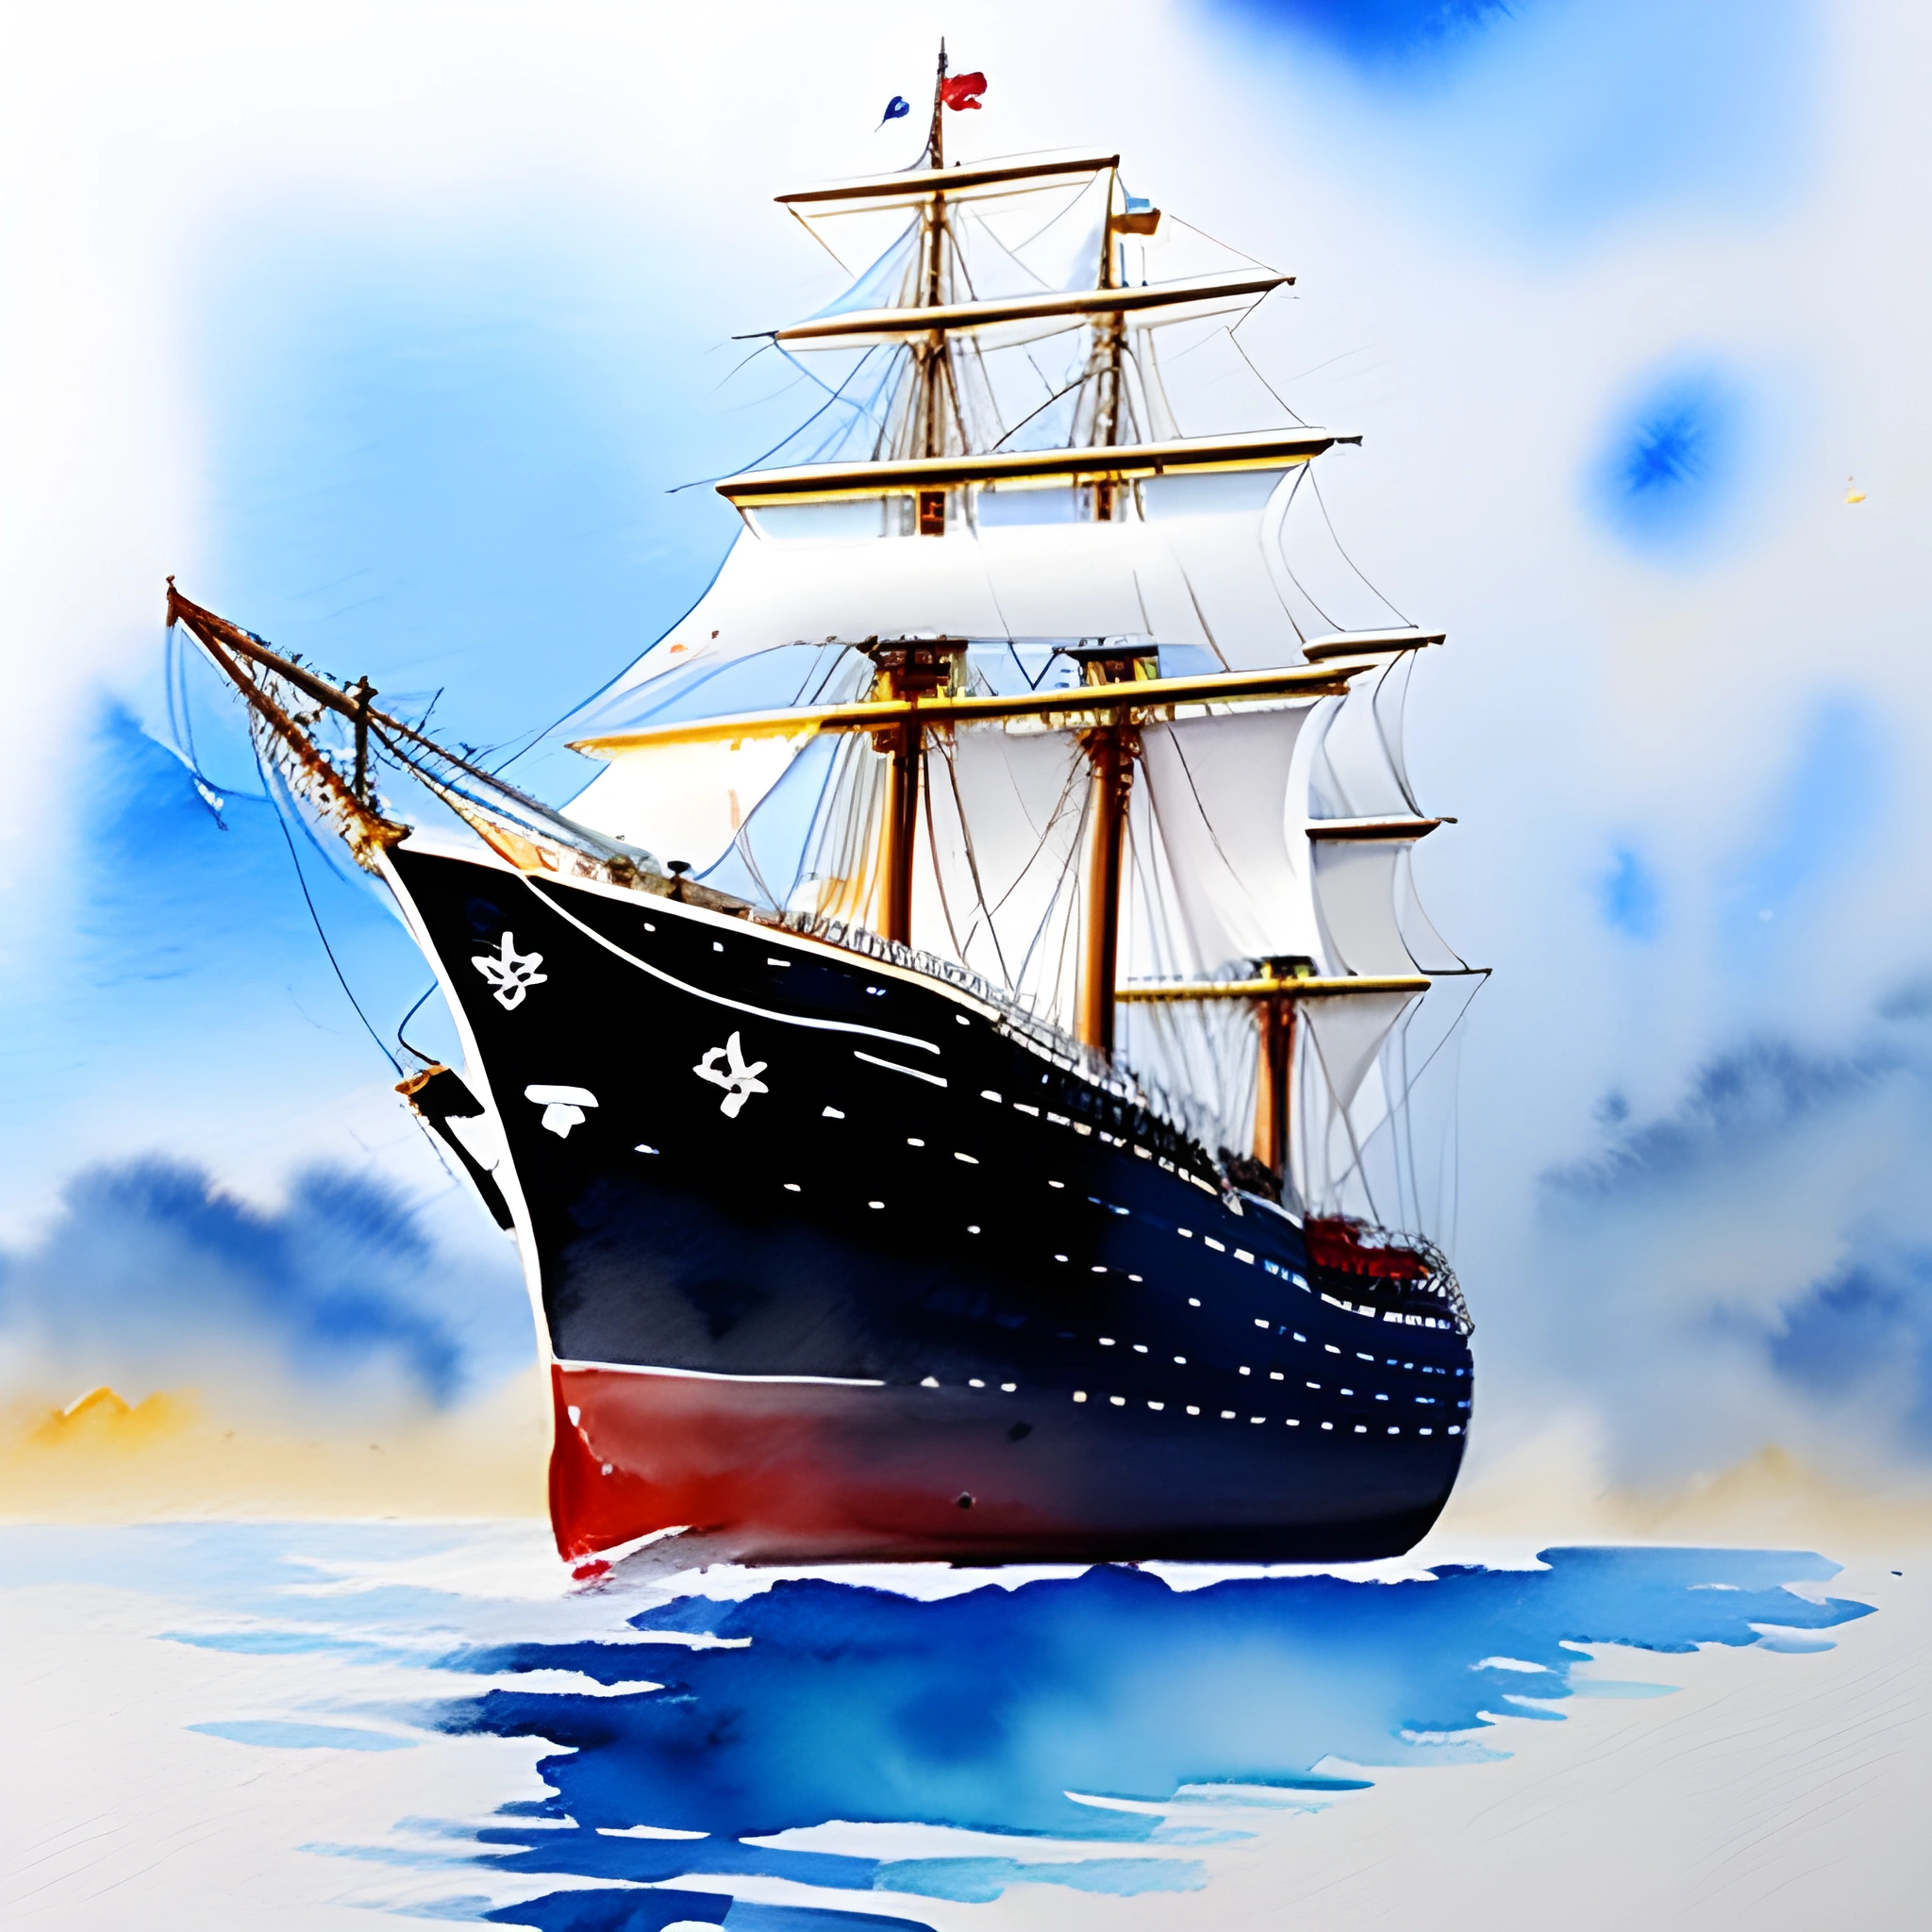 painting of a large ship in the water with a sky background